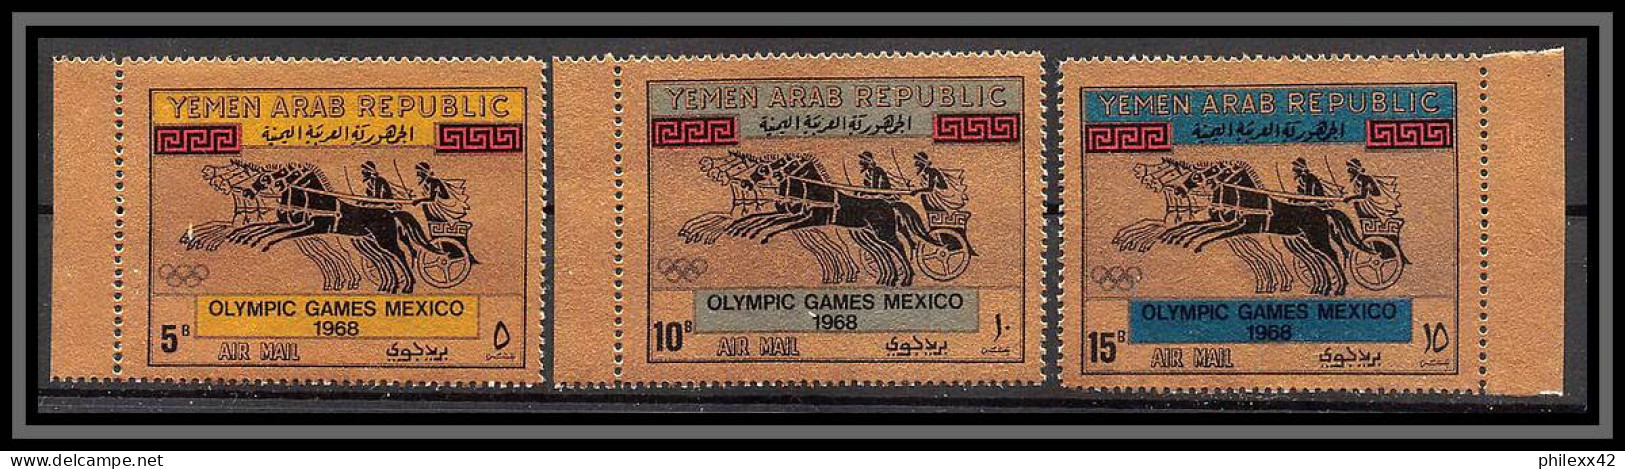 Nord Yemen YAR - 4402/ N°742/744 Jeux Olympiques (olympic Games) Mexico 1968 OR Gold Stamps Neuf ** MNH - Verano 1968: México